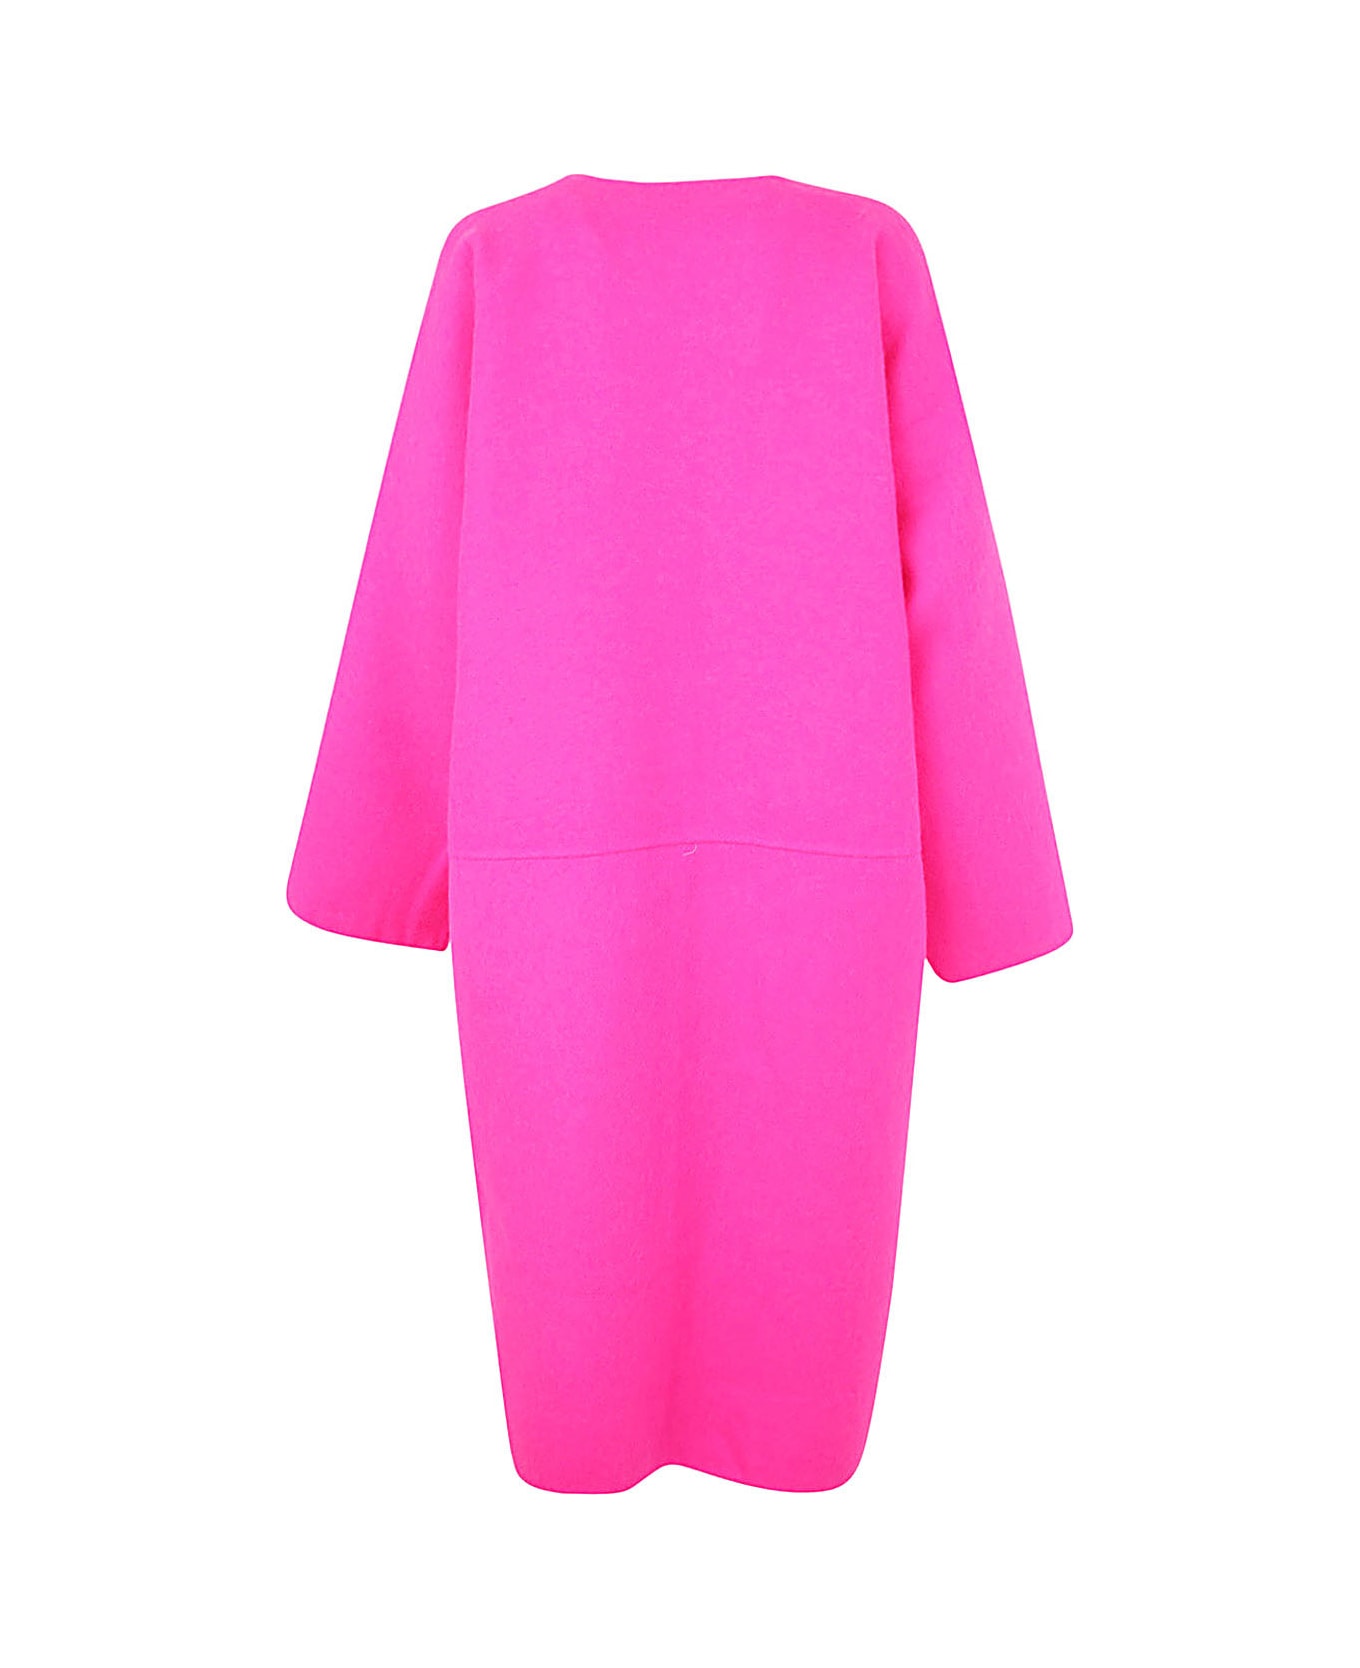 Sofie d'Hoore Double Face Coat With Slit Front Pockets - Fuchsia Snow